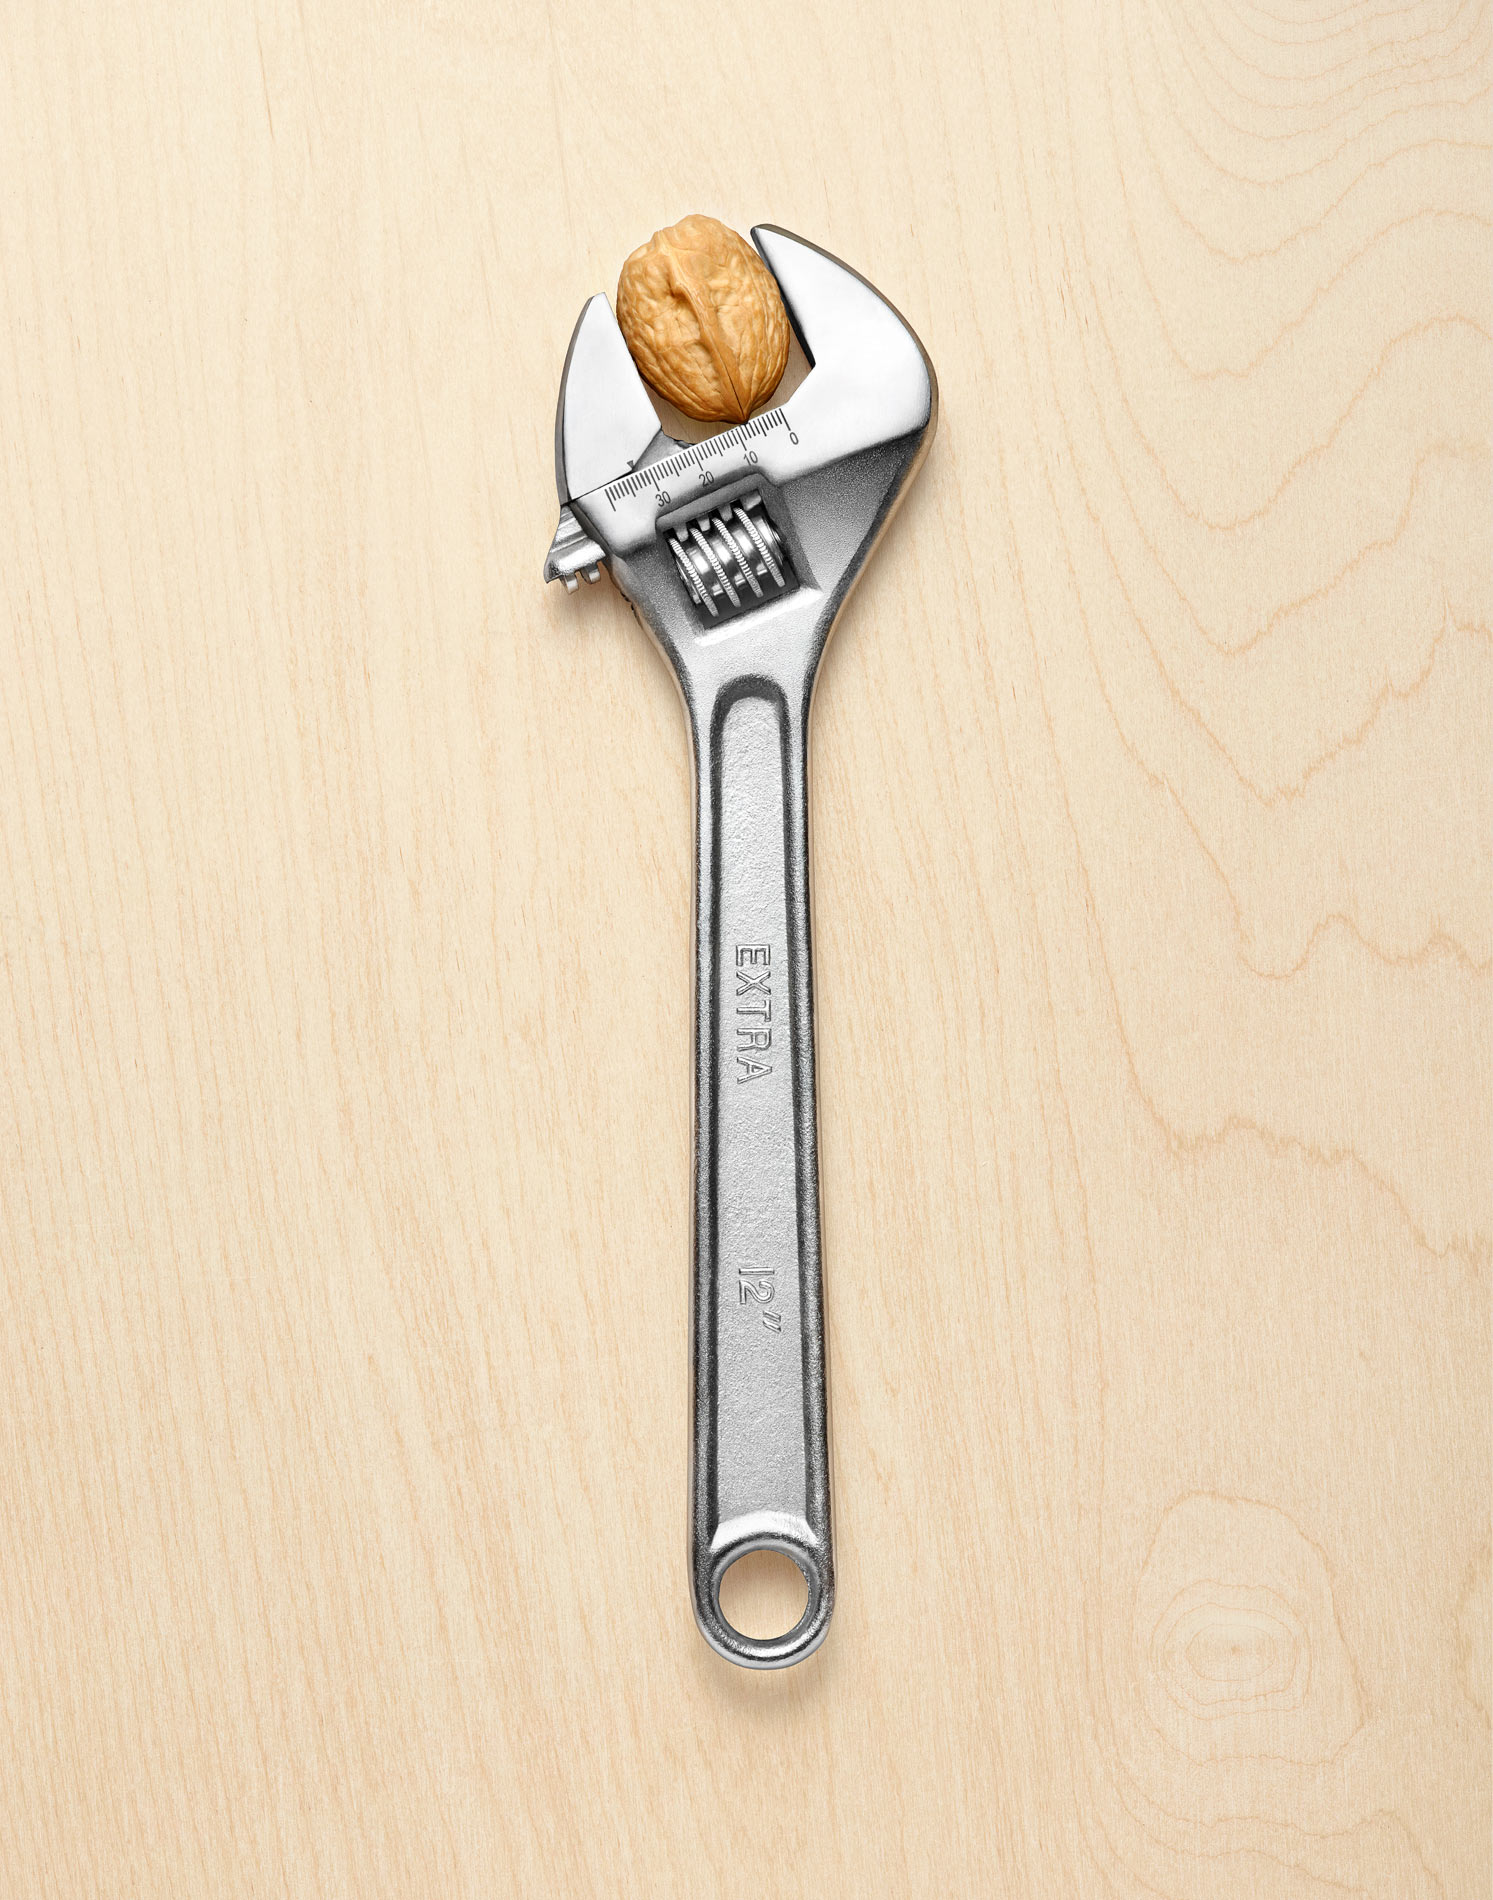 Walnut getting crushed in wrench by Alexander Kent London based still life and product photographer.